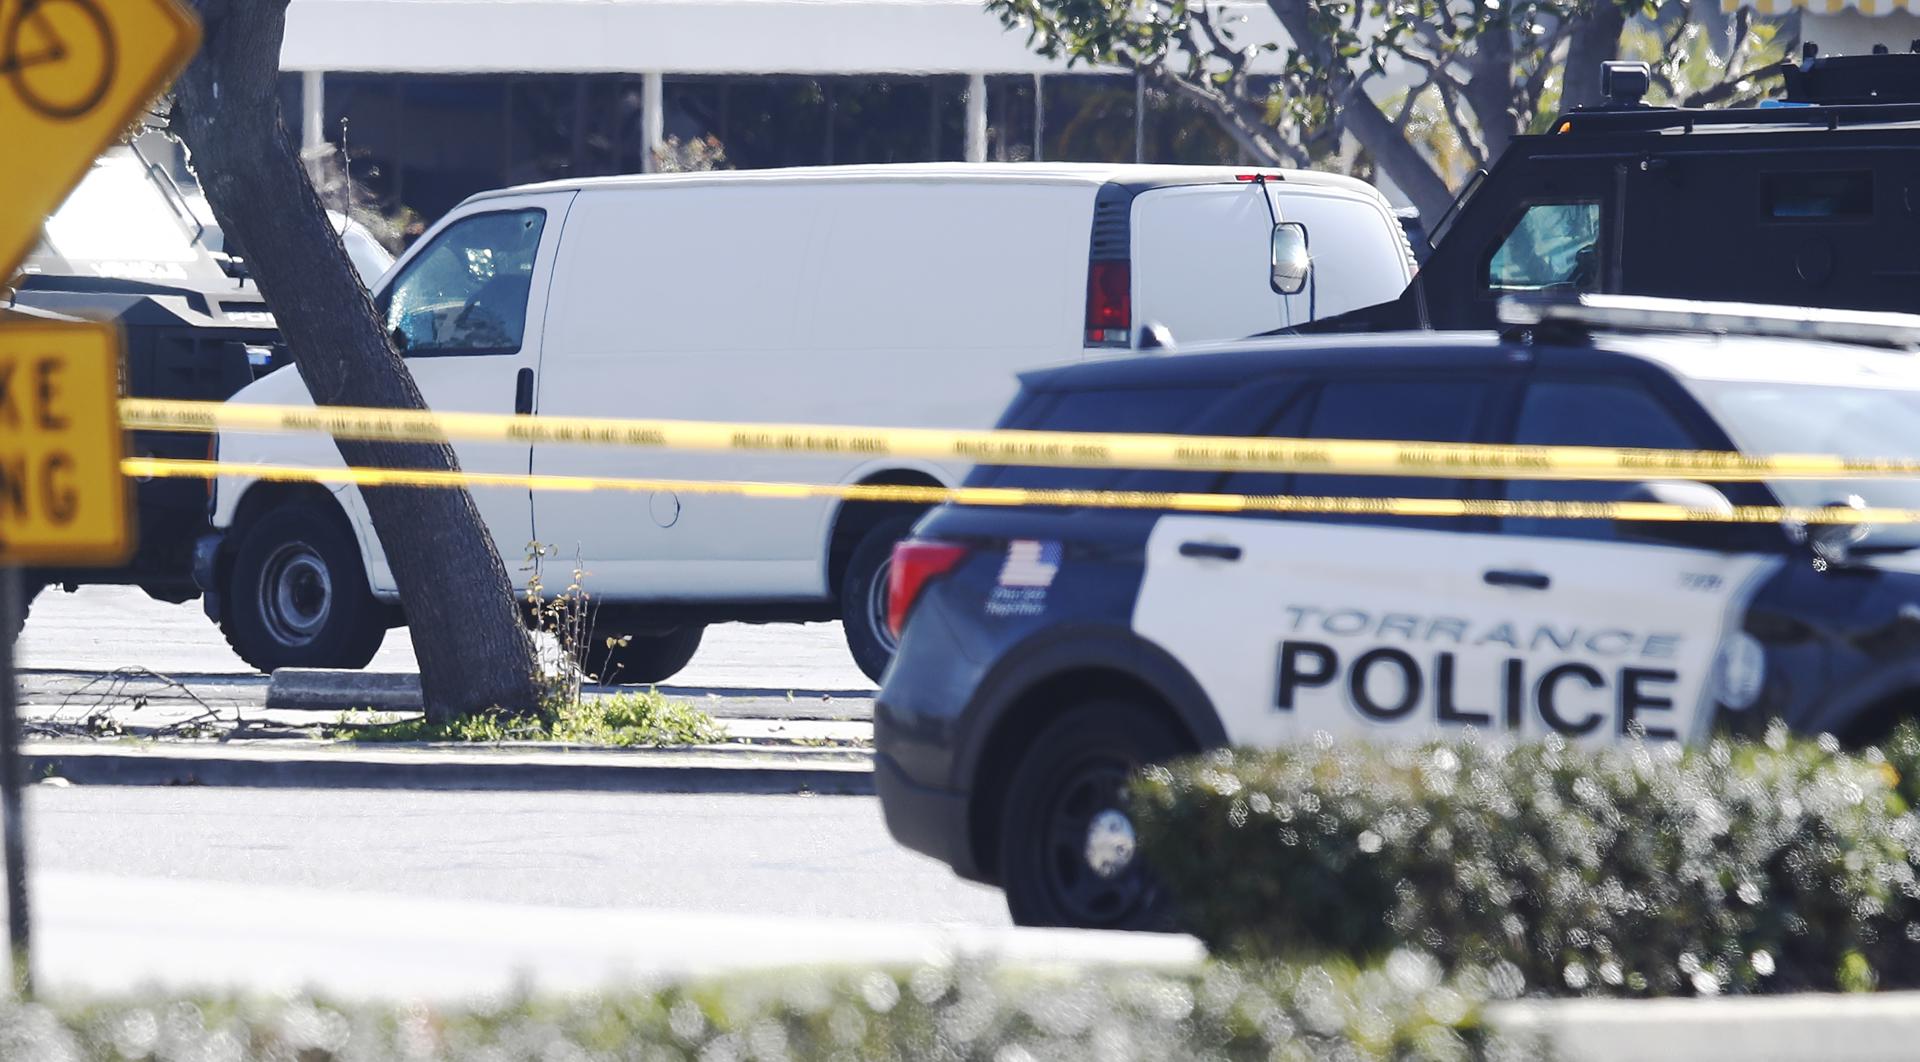 File photo of the scene of a mass shooting in the United States.  BLAZETRENDS/Caroline Brehman